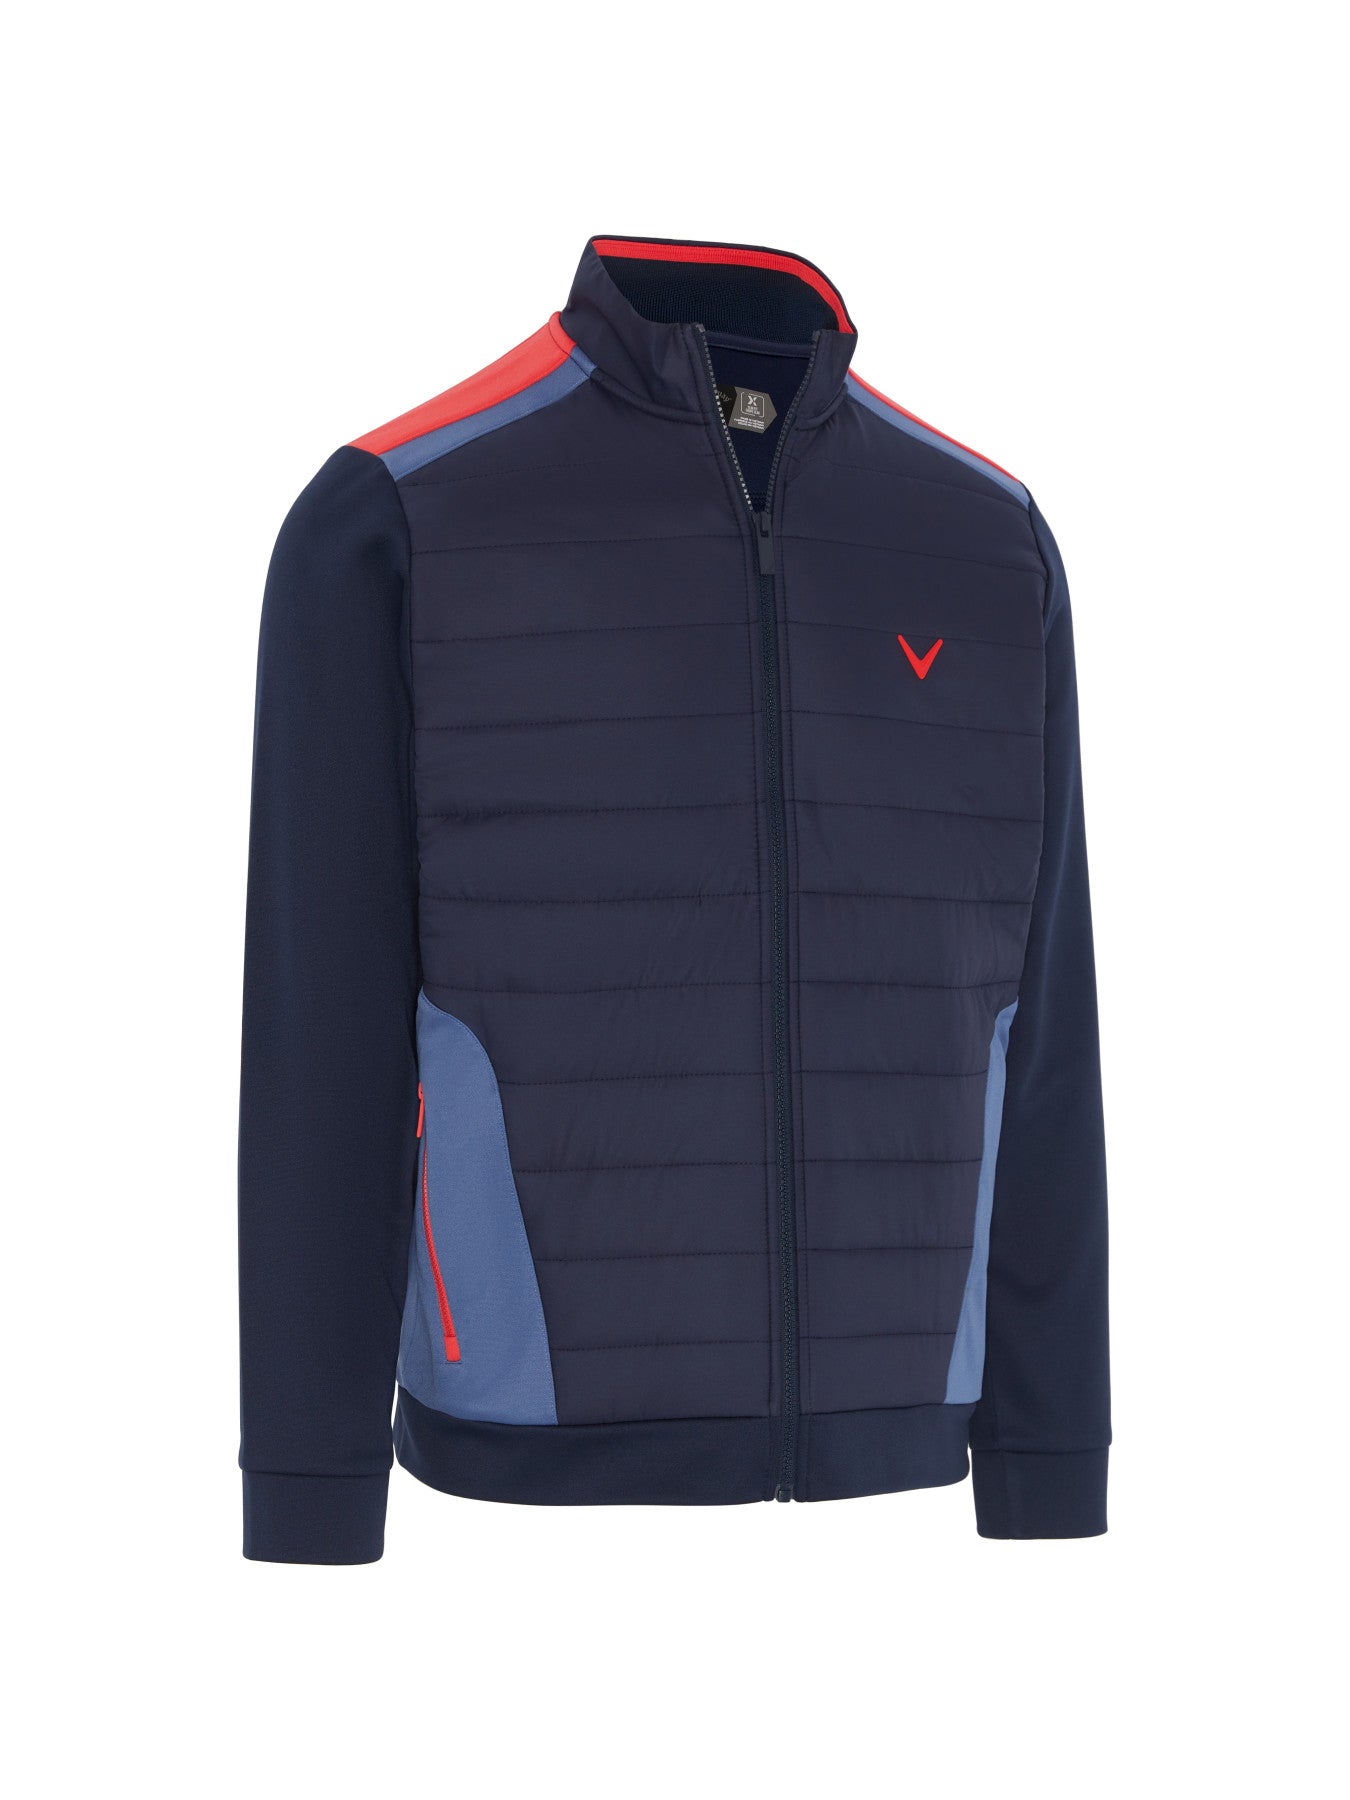 View Long Sleeve Racer Mixed Media Puffer In Navy Blazer information